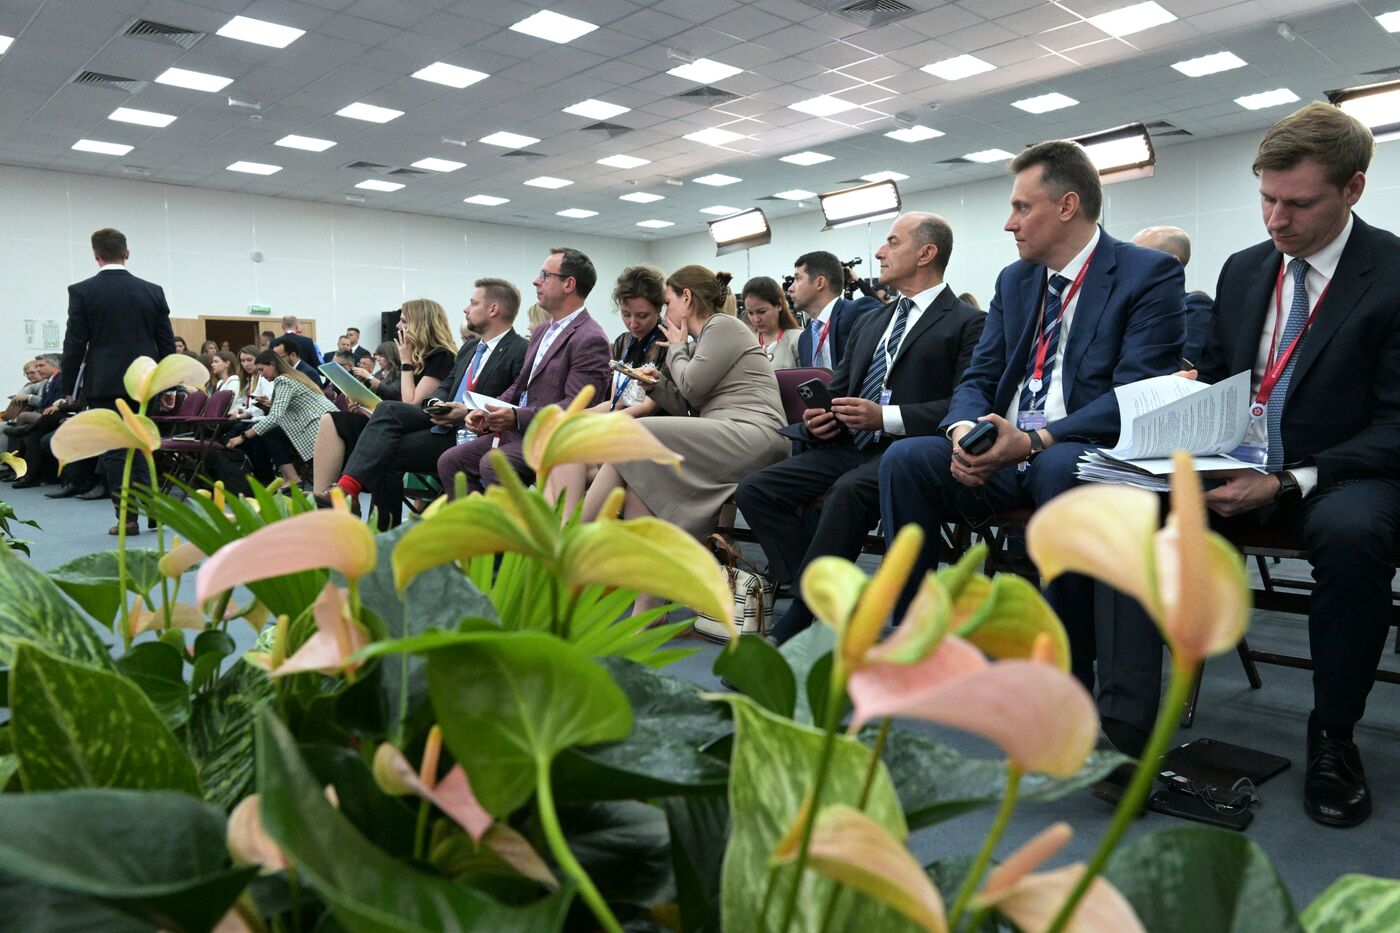 SPIEF-2023. Ensuring Global Food Security in the Current Environment